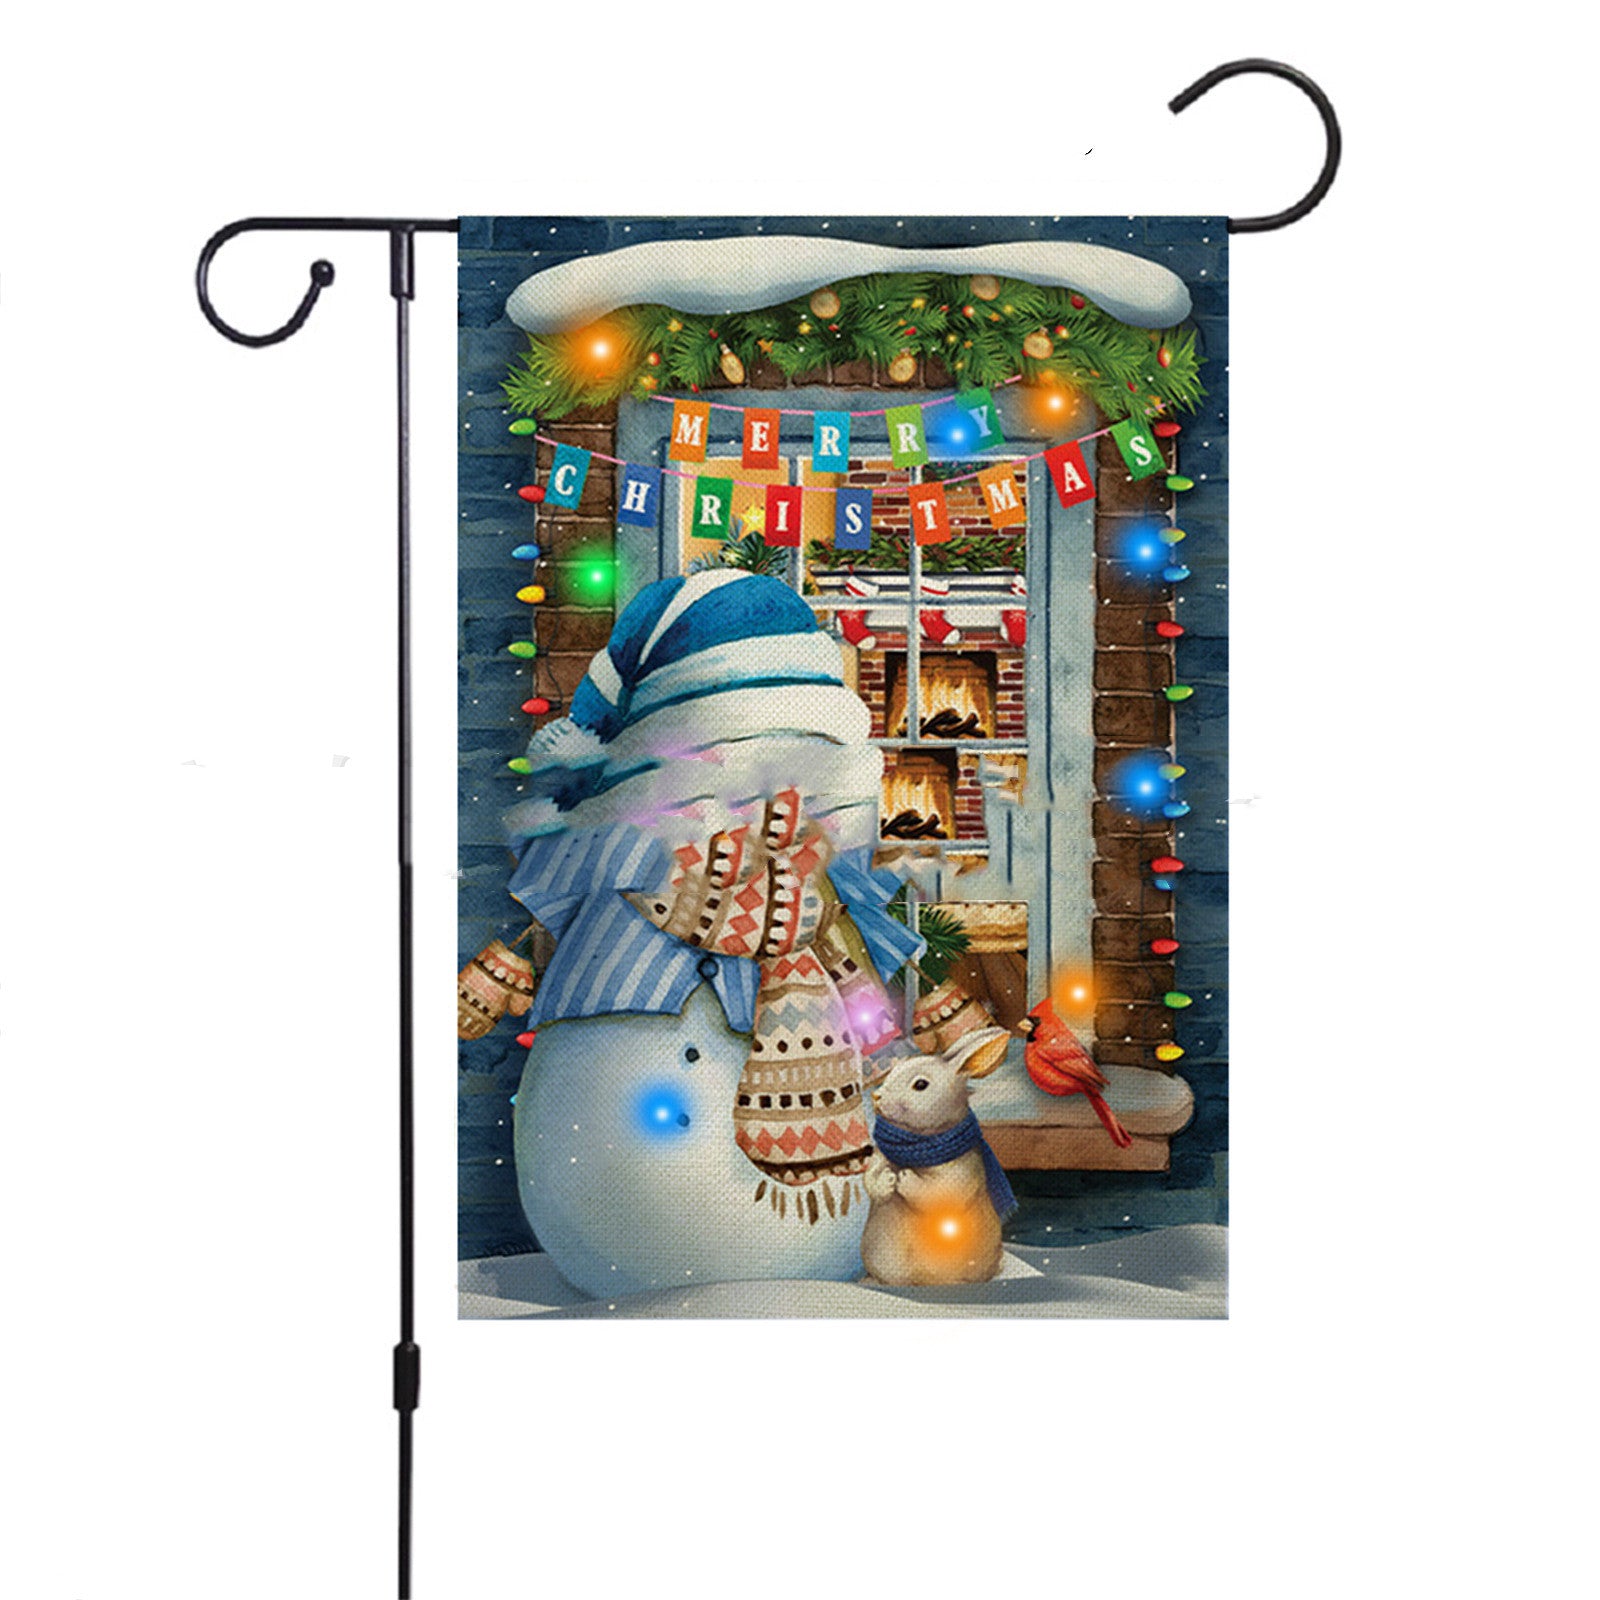 Outdoor Decoration Christmas With Lights Garden Flag, Outdoor and Indoor Christmas decorations Items, Christmas ornaments, Christmas tree decorations, salt dough ornaments, Christmas window decorations, cheap Christmas decorations, snowmen, and ornaments.